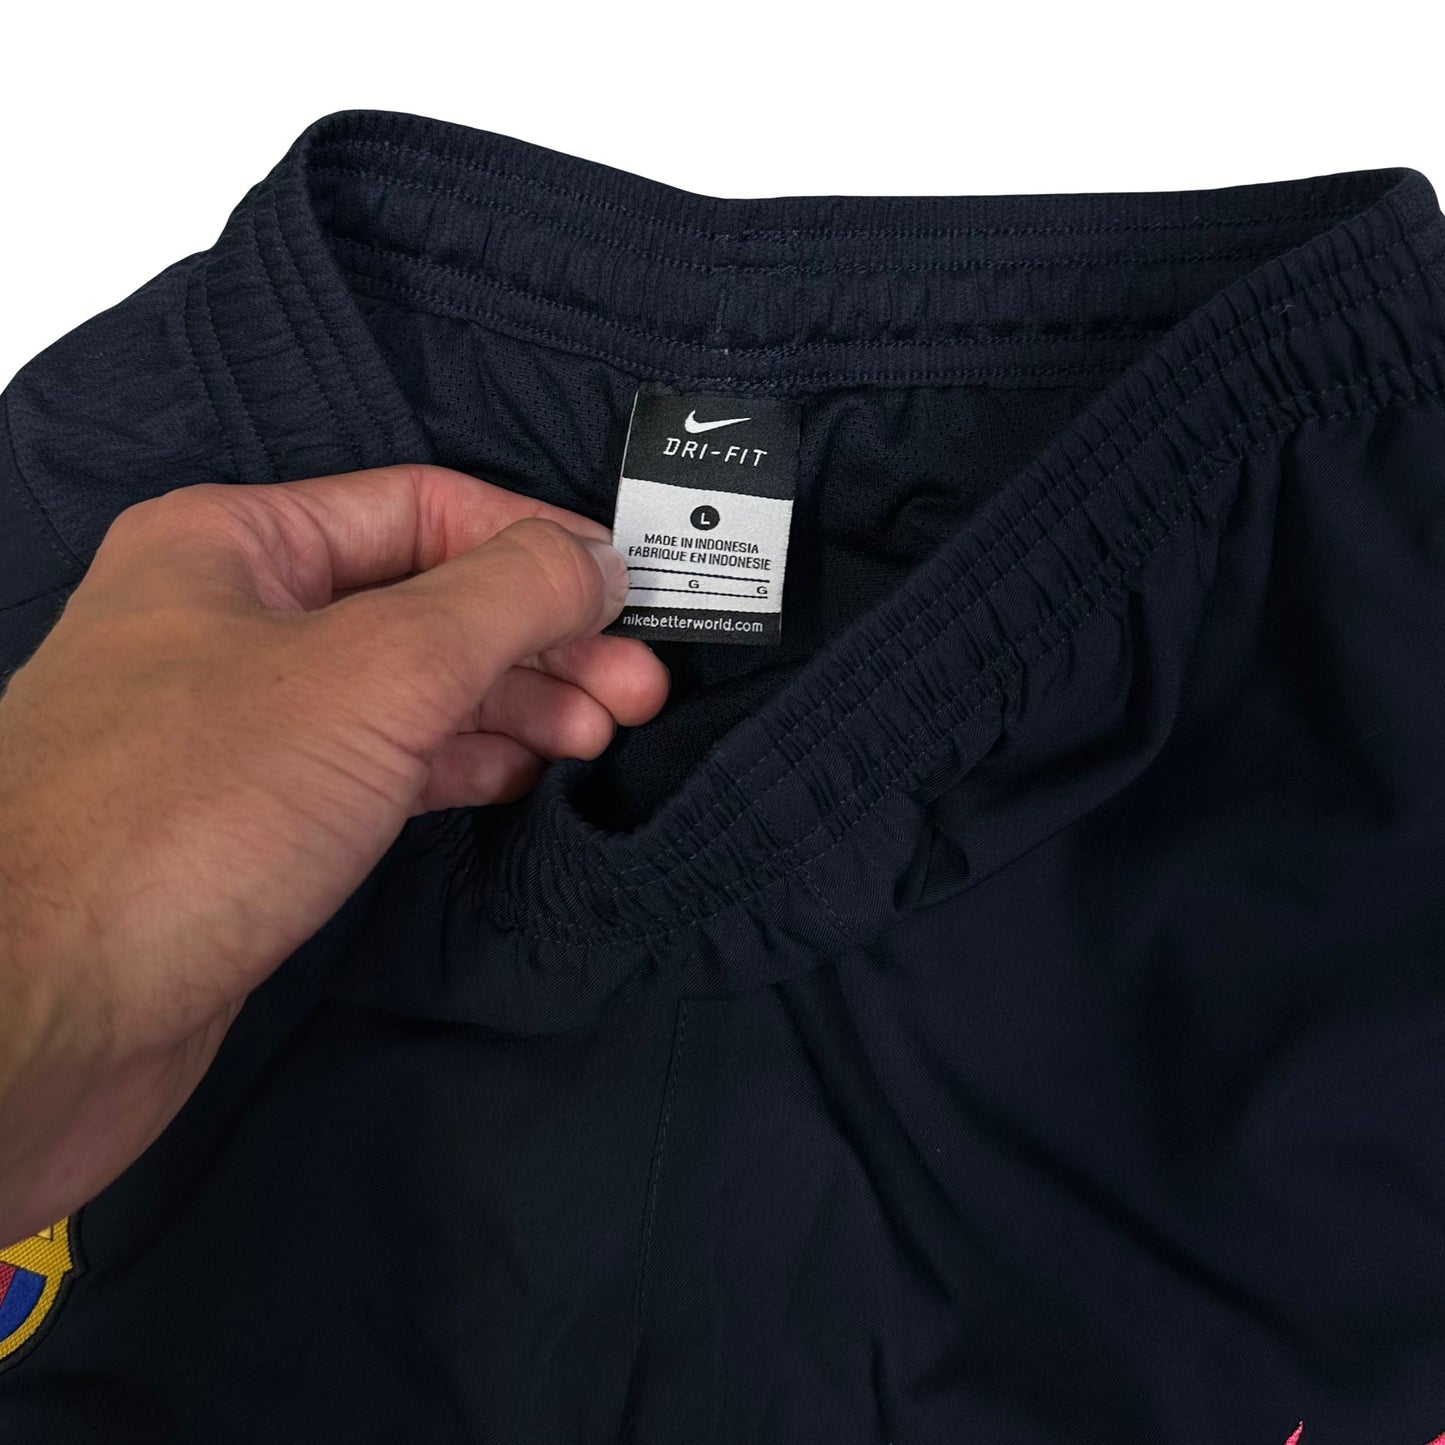 Nike Barcelona 2014/15 Tracksuit Bottoms In Navy & Pink ( Teen L )